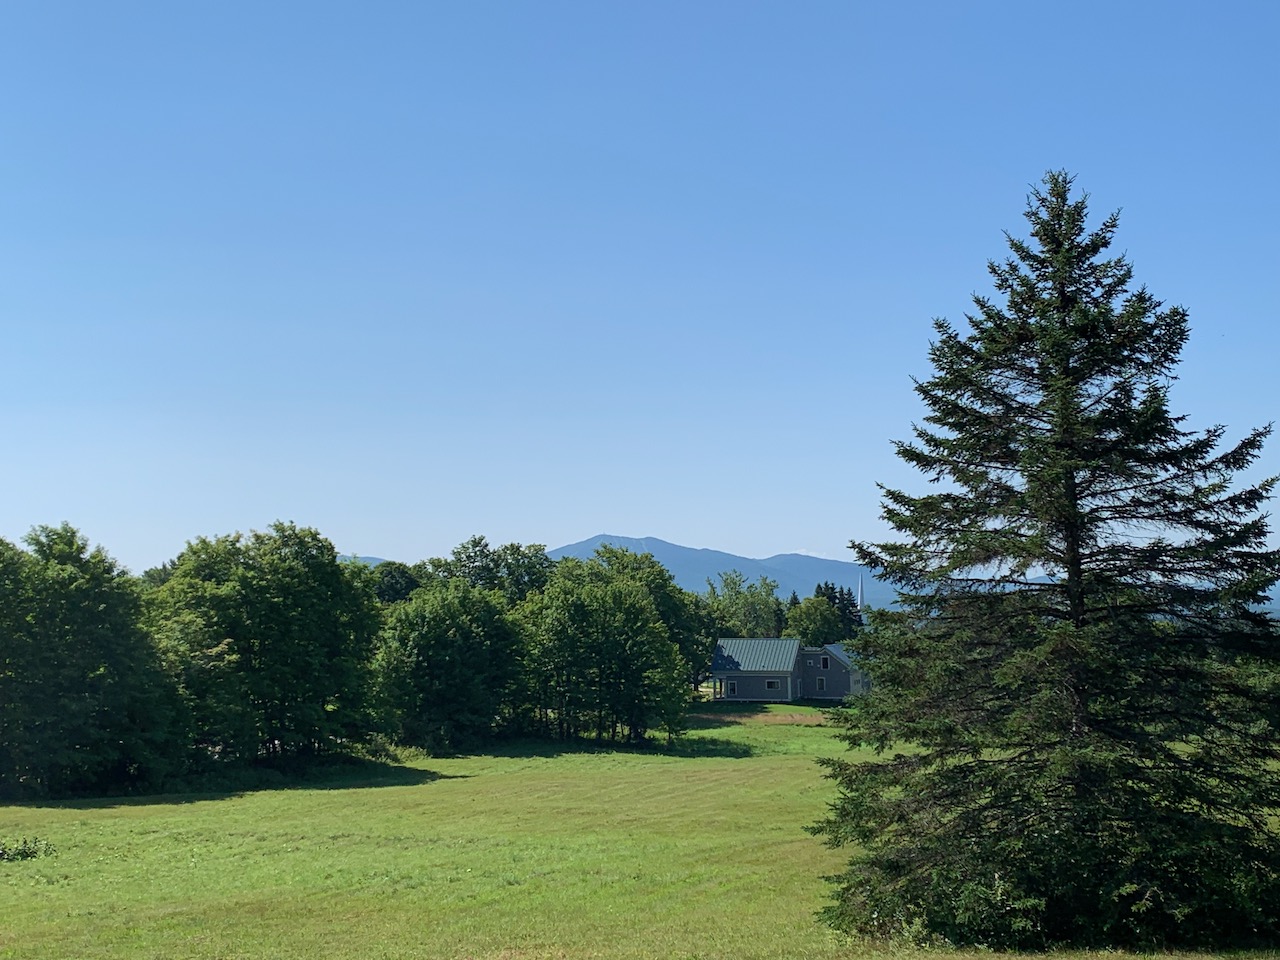 A nice view from the house in Newark, Vermont